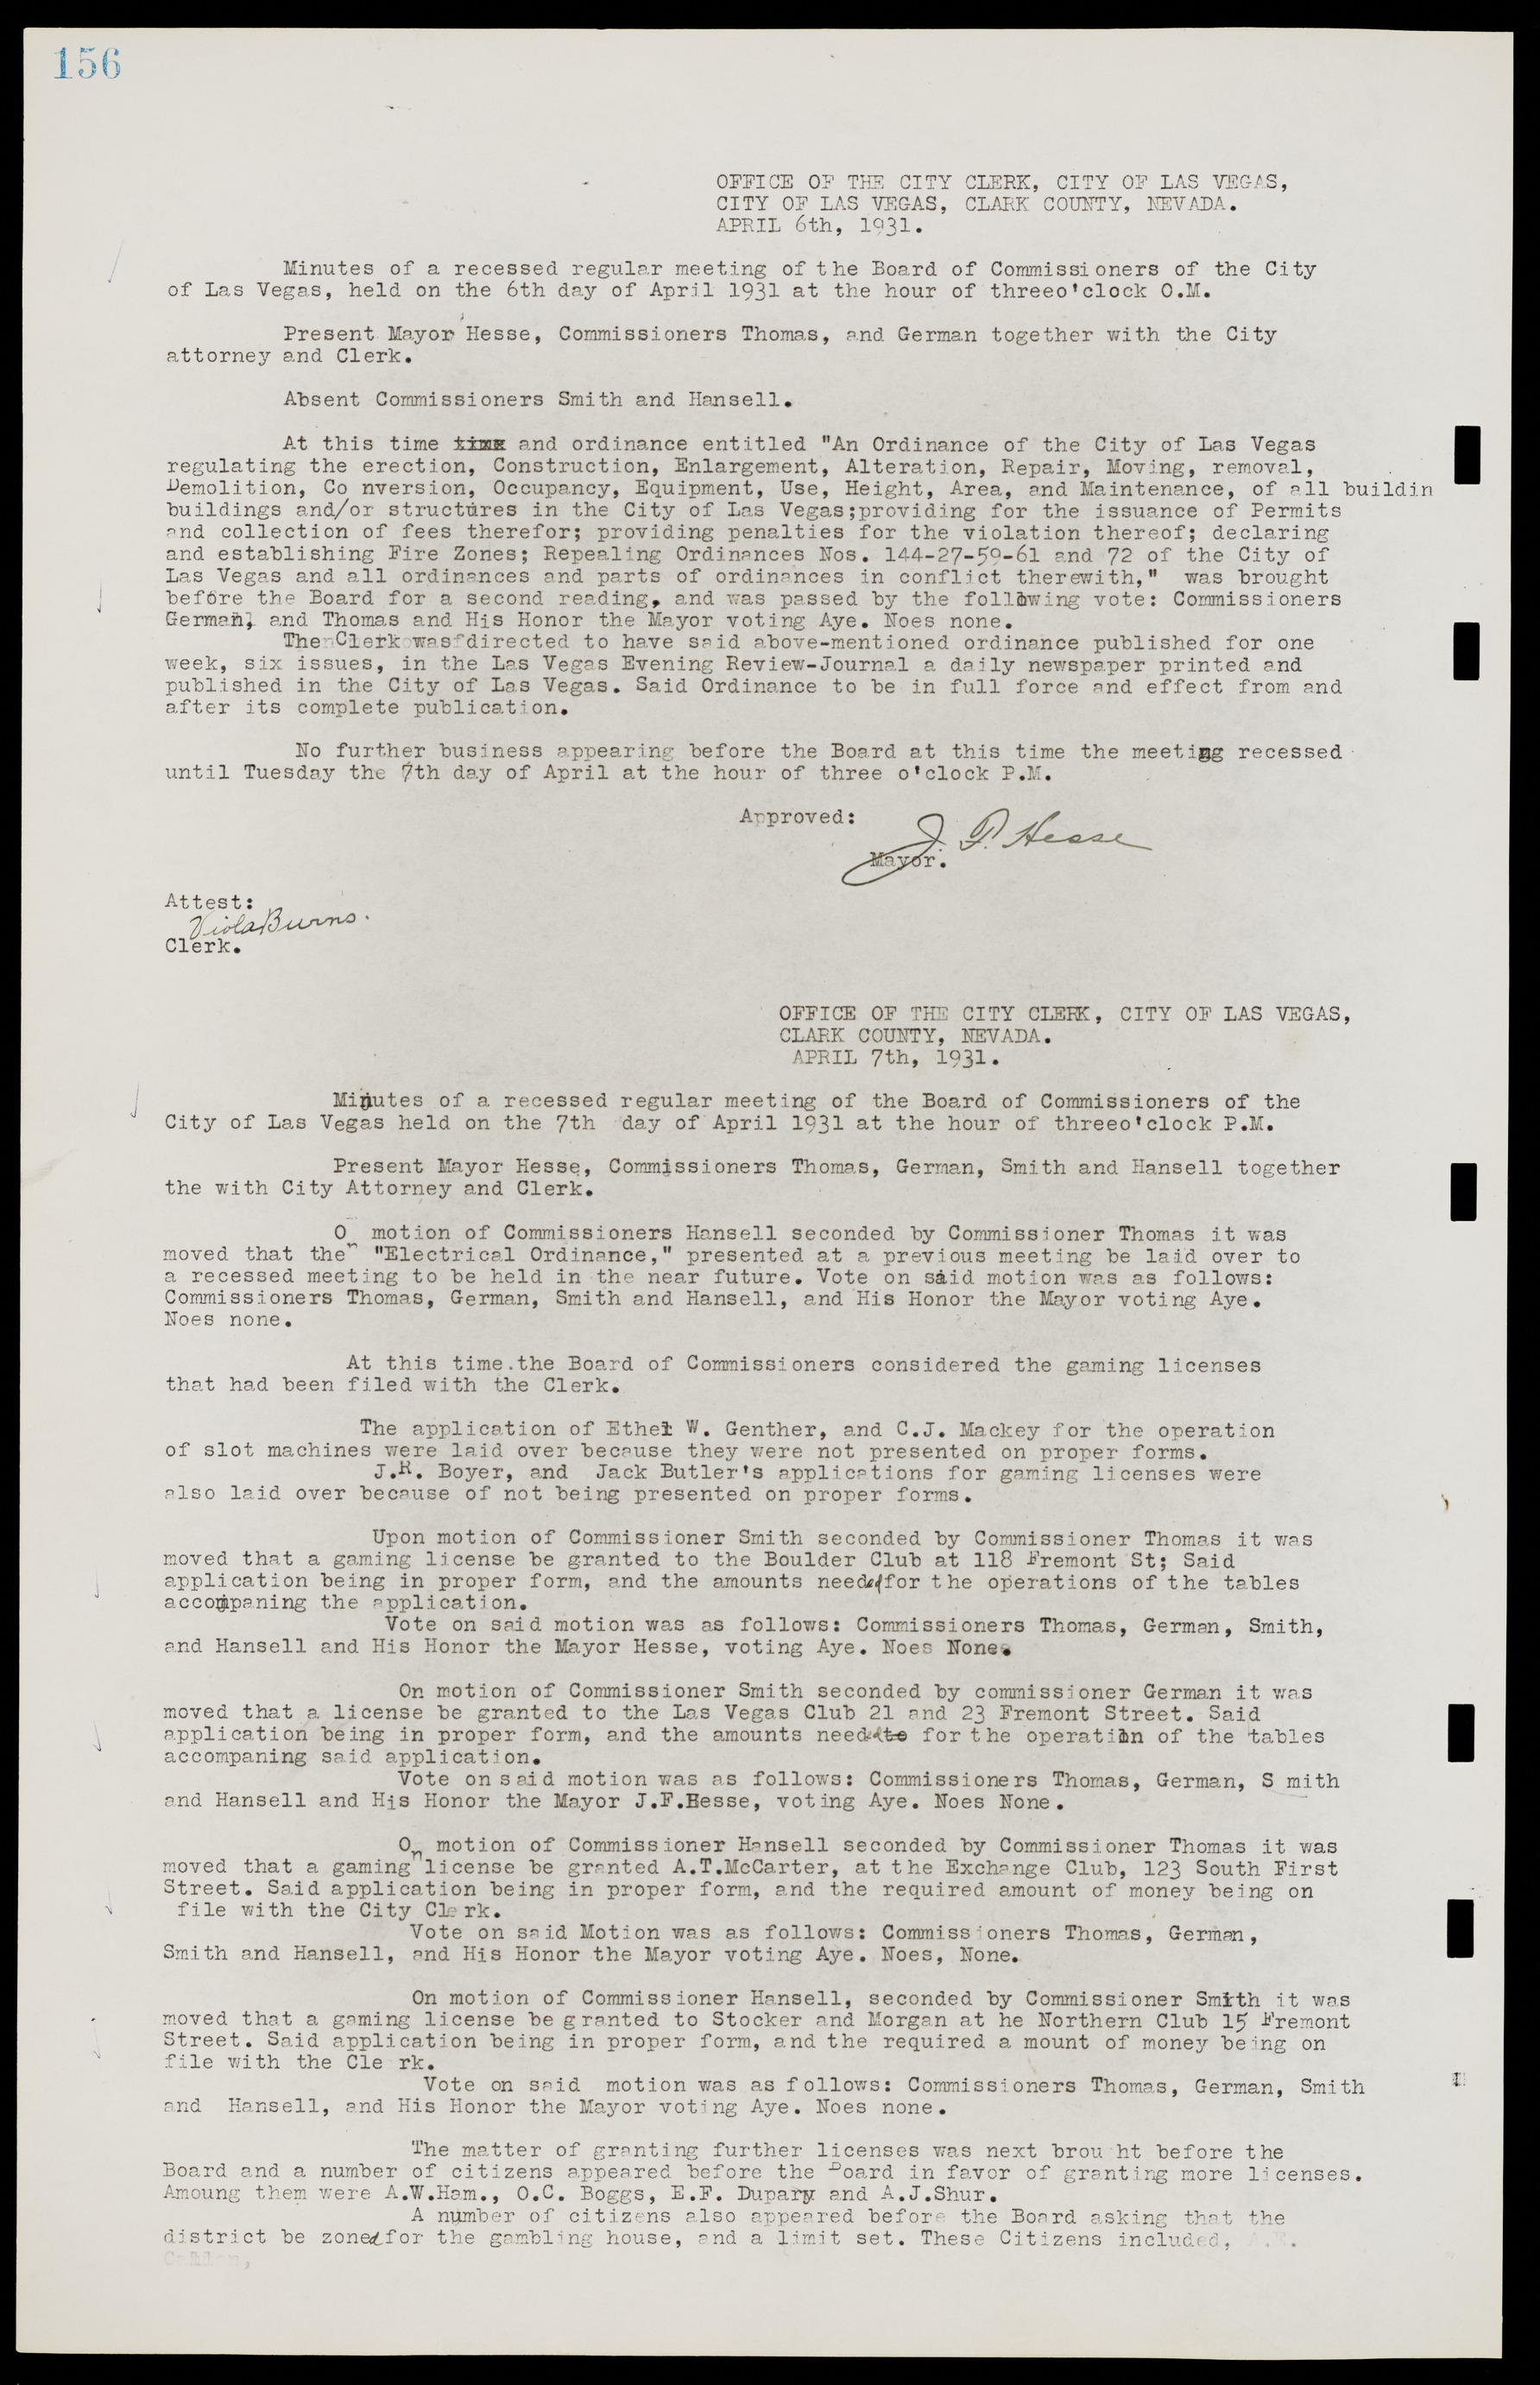 Las Vegas City Commission Minutes, May 14, 1929 to February 11, 1937, lvc000003-162